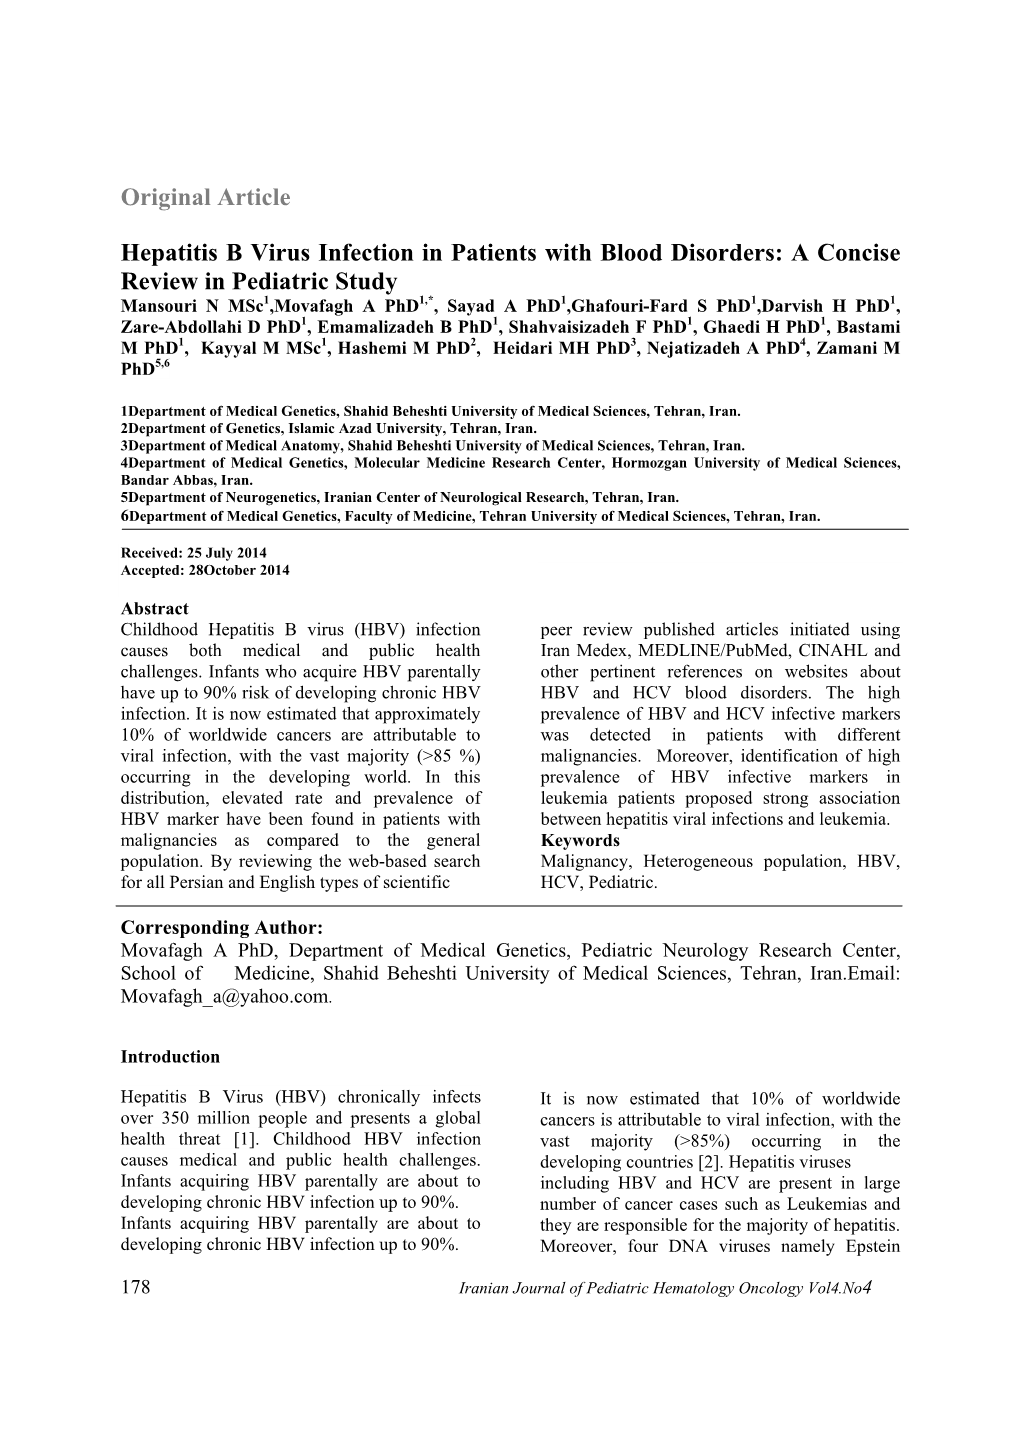 Hepatitis B Virus Infection in Patients with Blood Disorders: a Concise